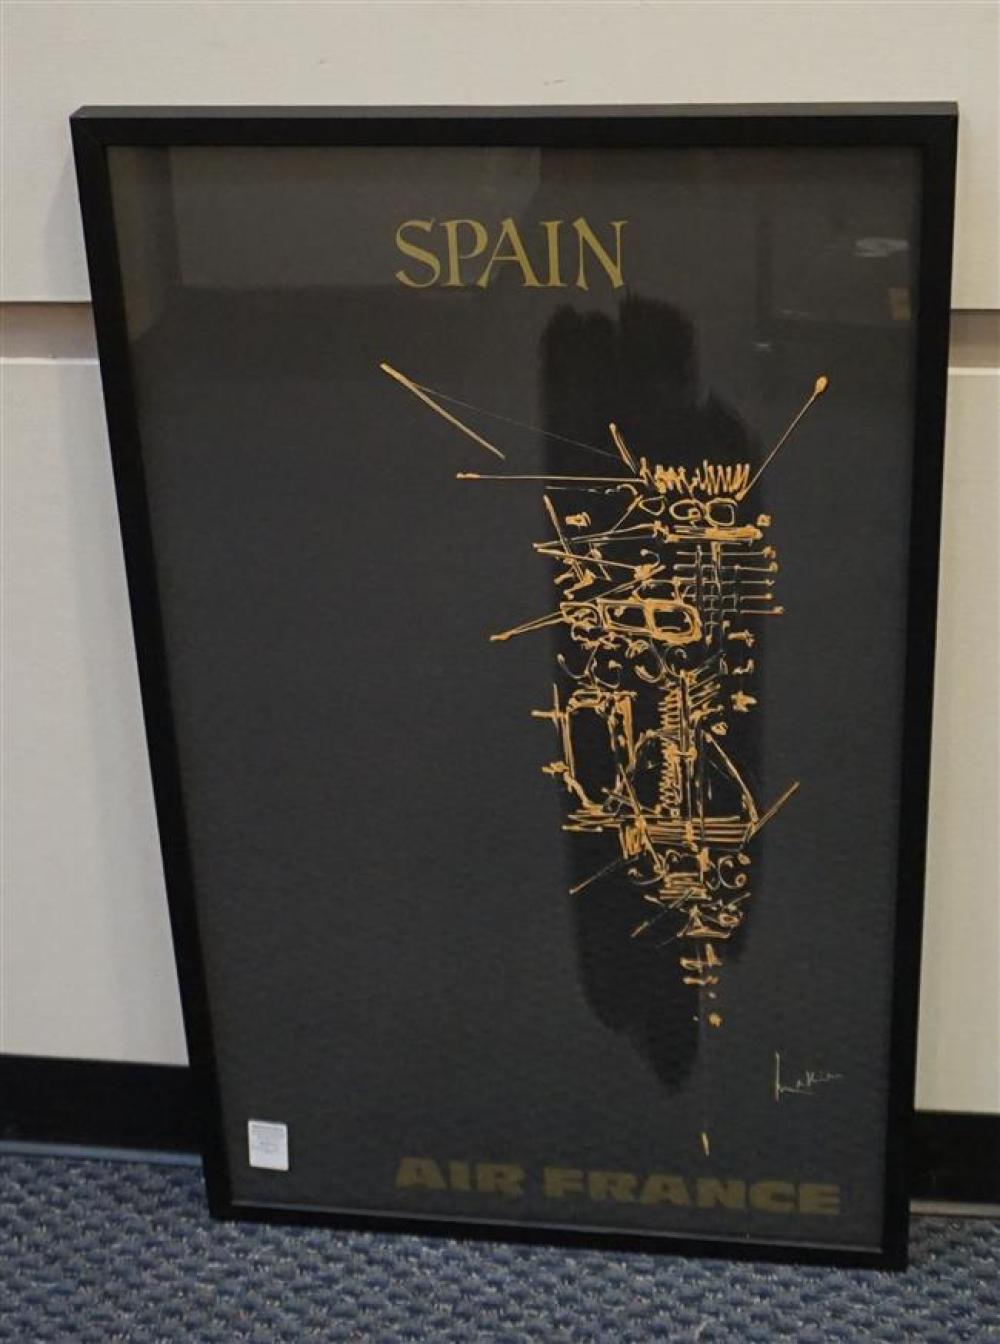  SPAIN LITHOGRAPHIC POSTER FOR 322a55